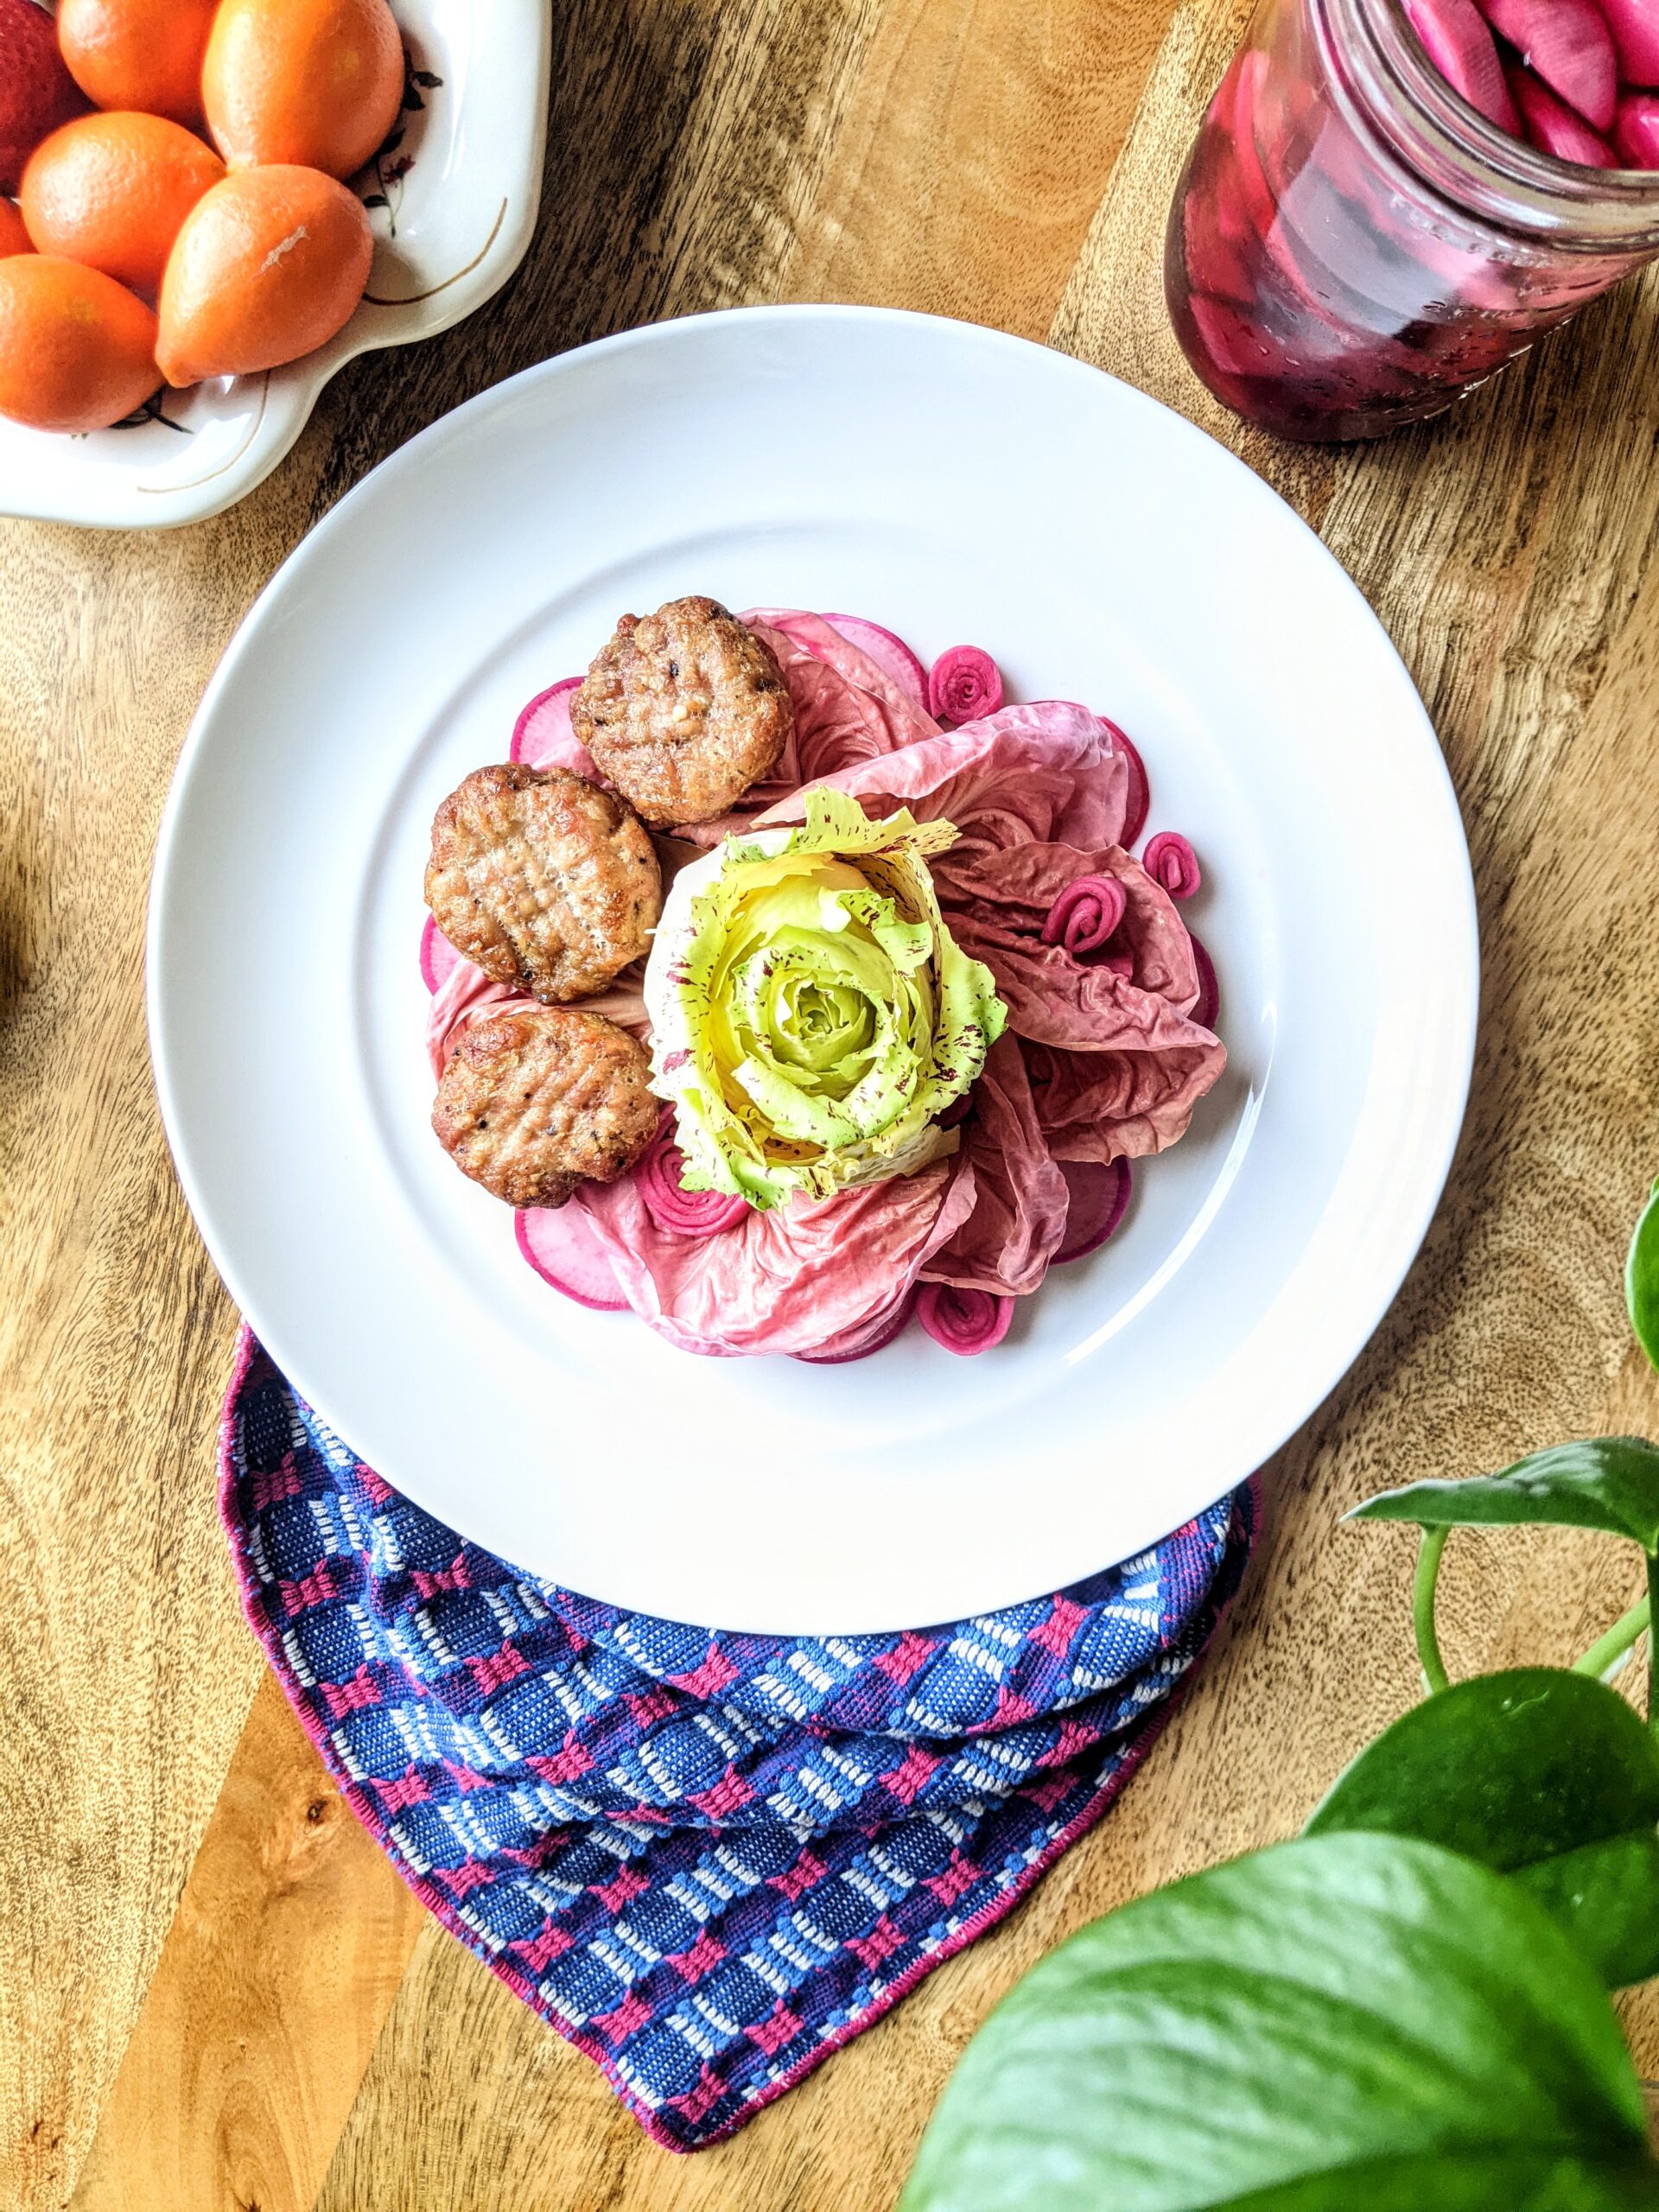 A trio of Pork Lemongrass Patties with Pink Radicchio Salad and Pickled Turnip Roses